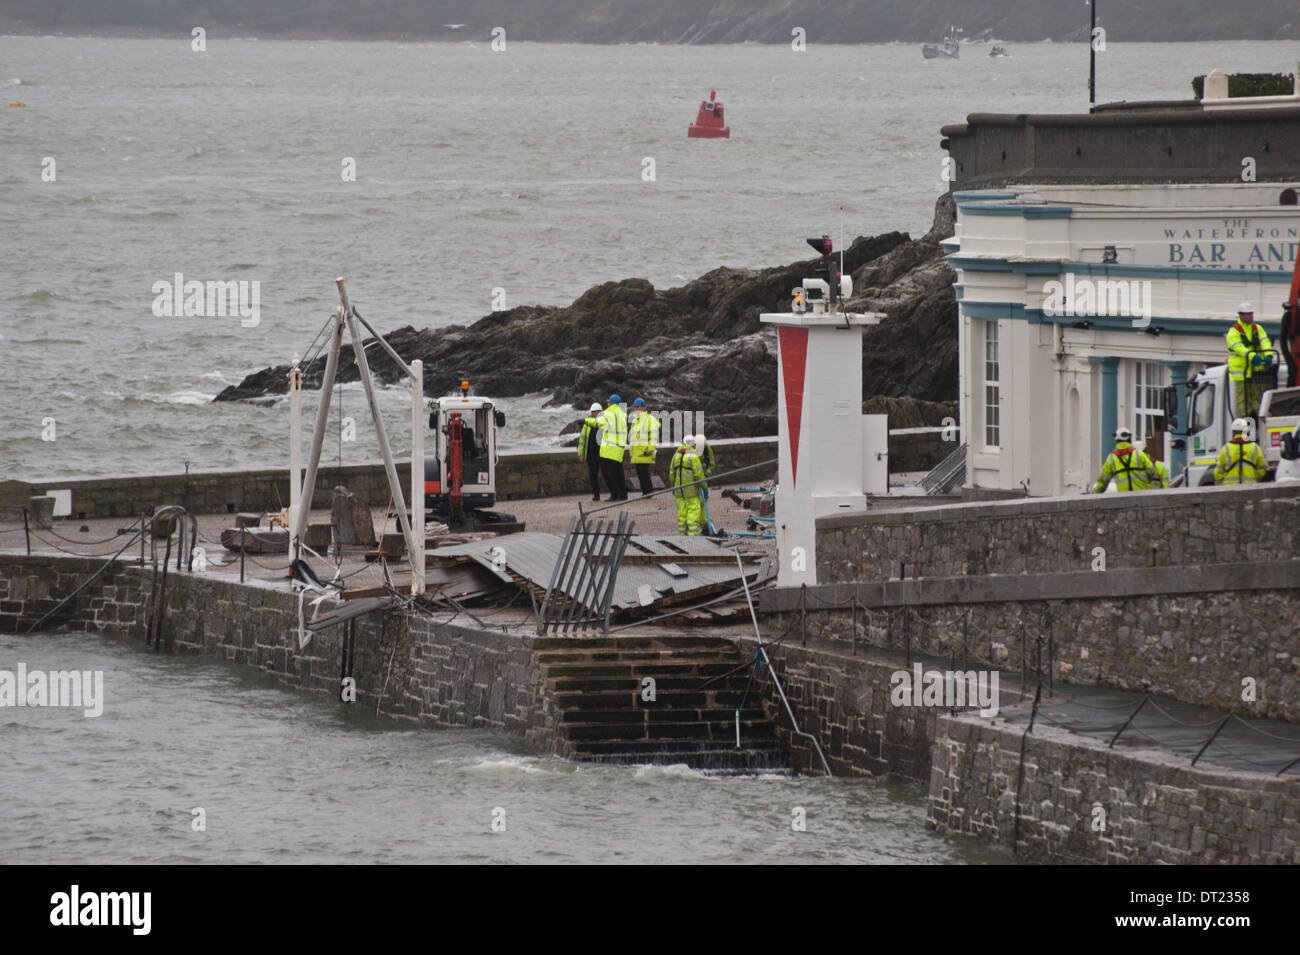 Plymouth, Devon, UK. 6th February 2014. The waterfront pub decking and entrance are demolished by giant waves during a storm, leaving council workers to try and clear up the debris before the next storm surge. Credit:  Anna Stevenson/Alamy Live News Stock Photo